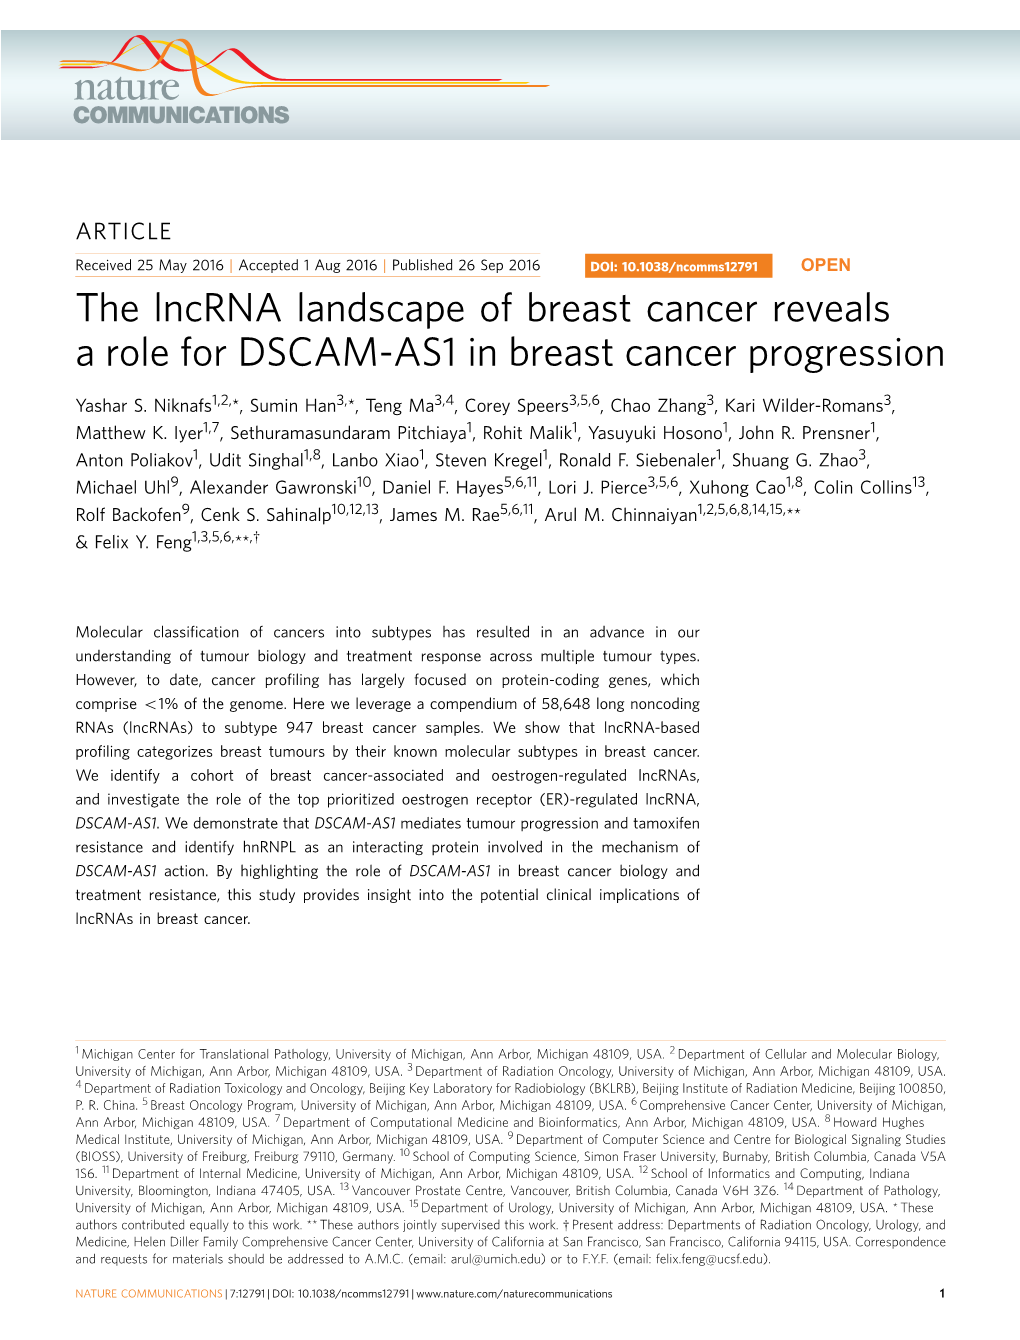 The Lncrna Landscape of Breast Cancer Reveals a Role for DSCAM-AS1 in Breast Cancer Progression